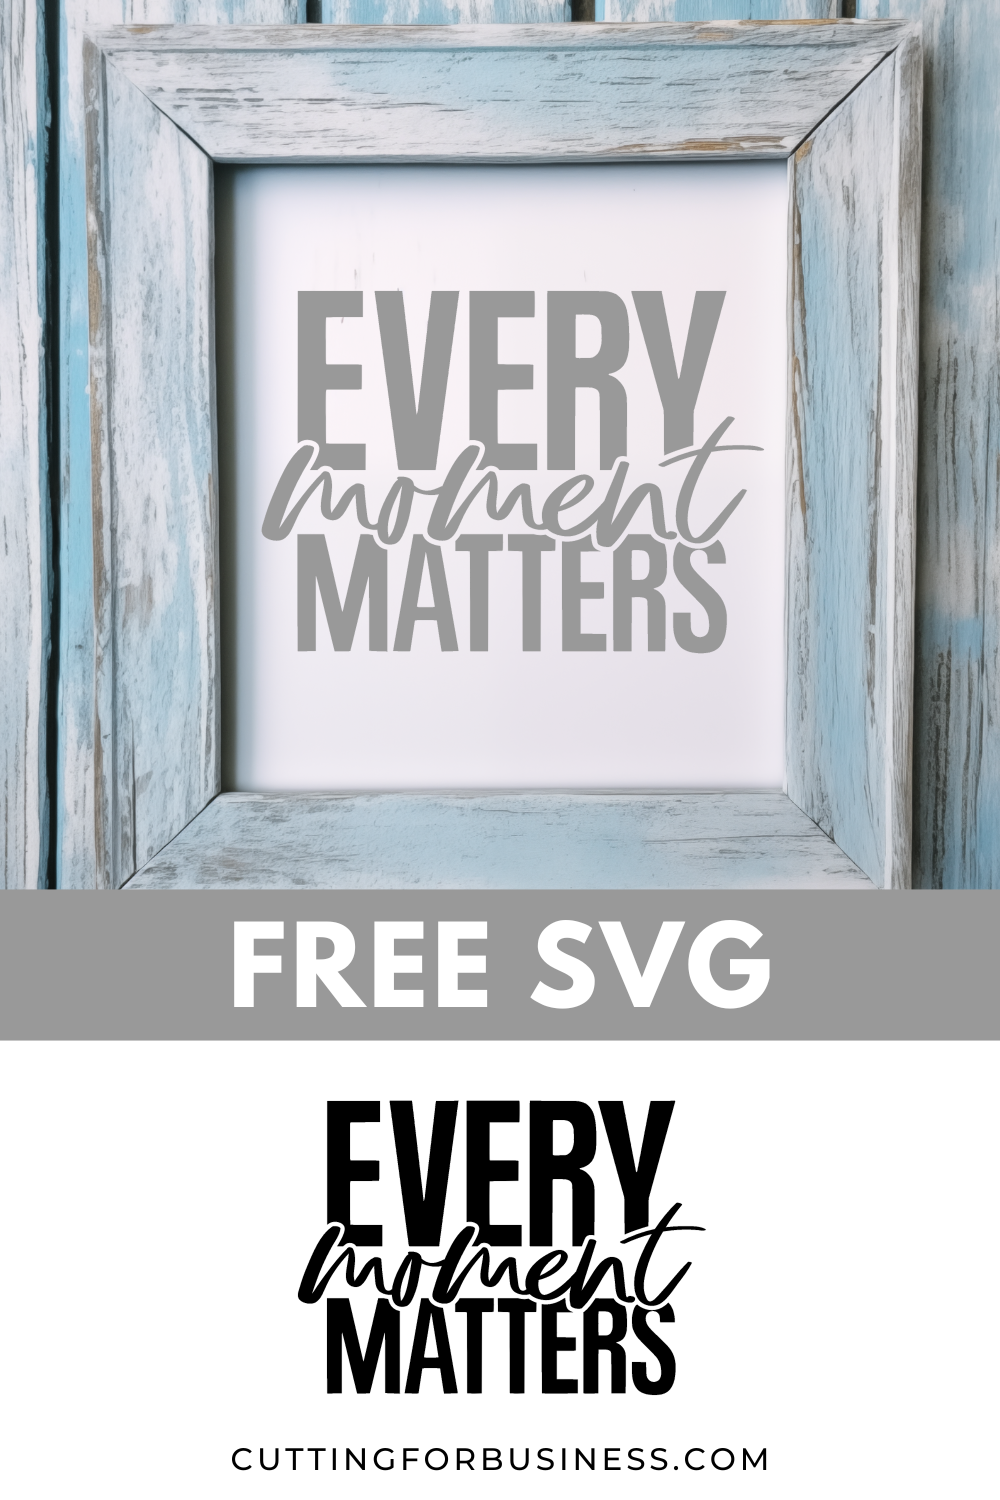 Free SVG - Every Moment Matters - cuttingforbusiness.com